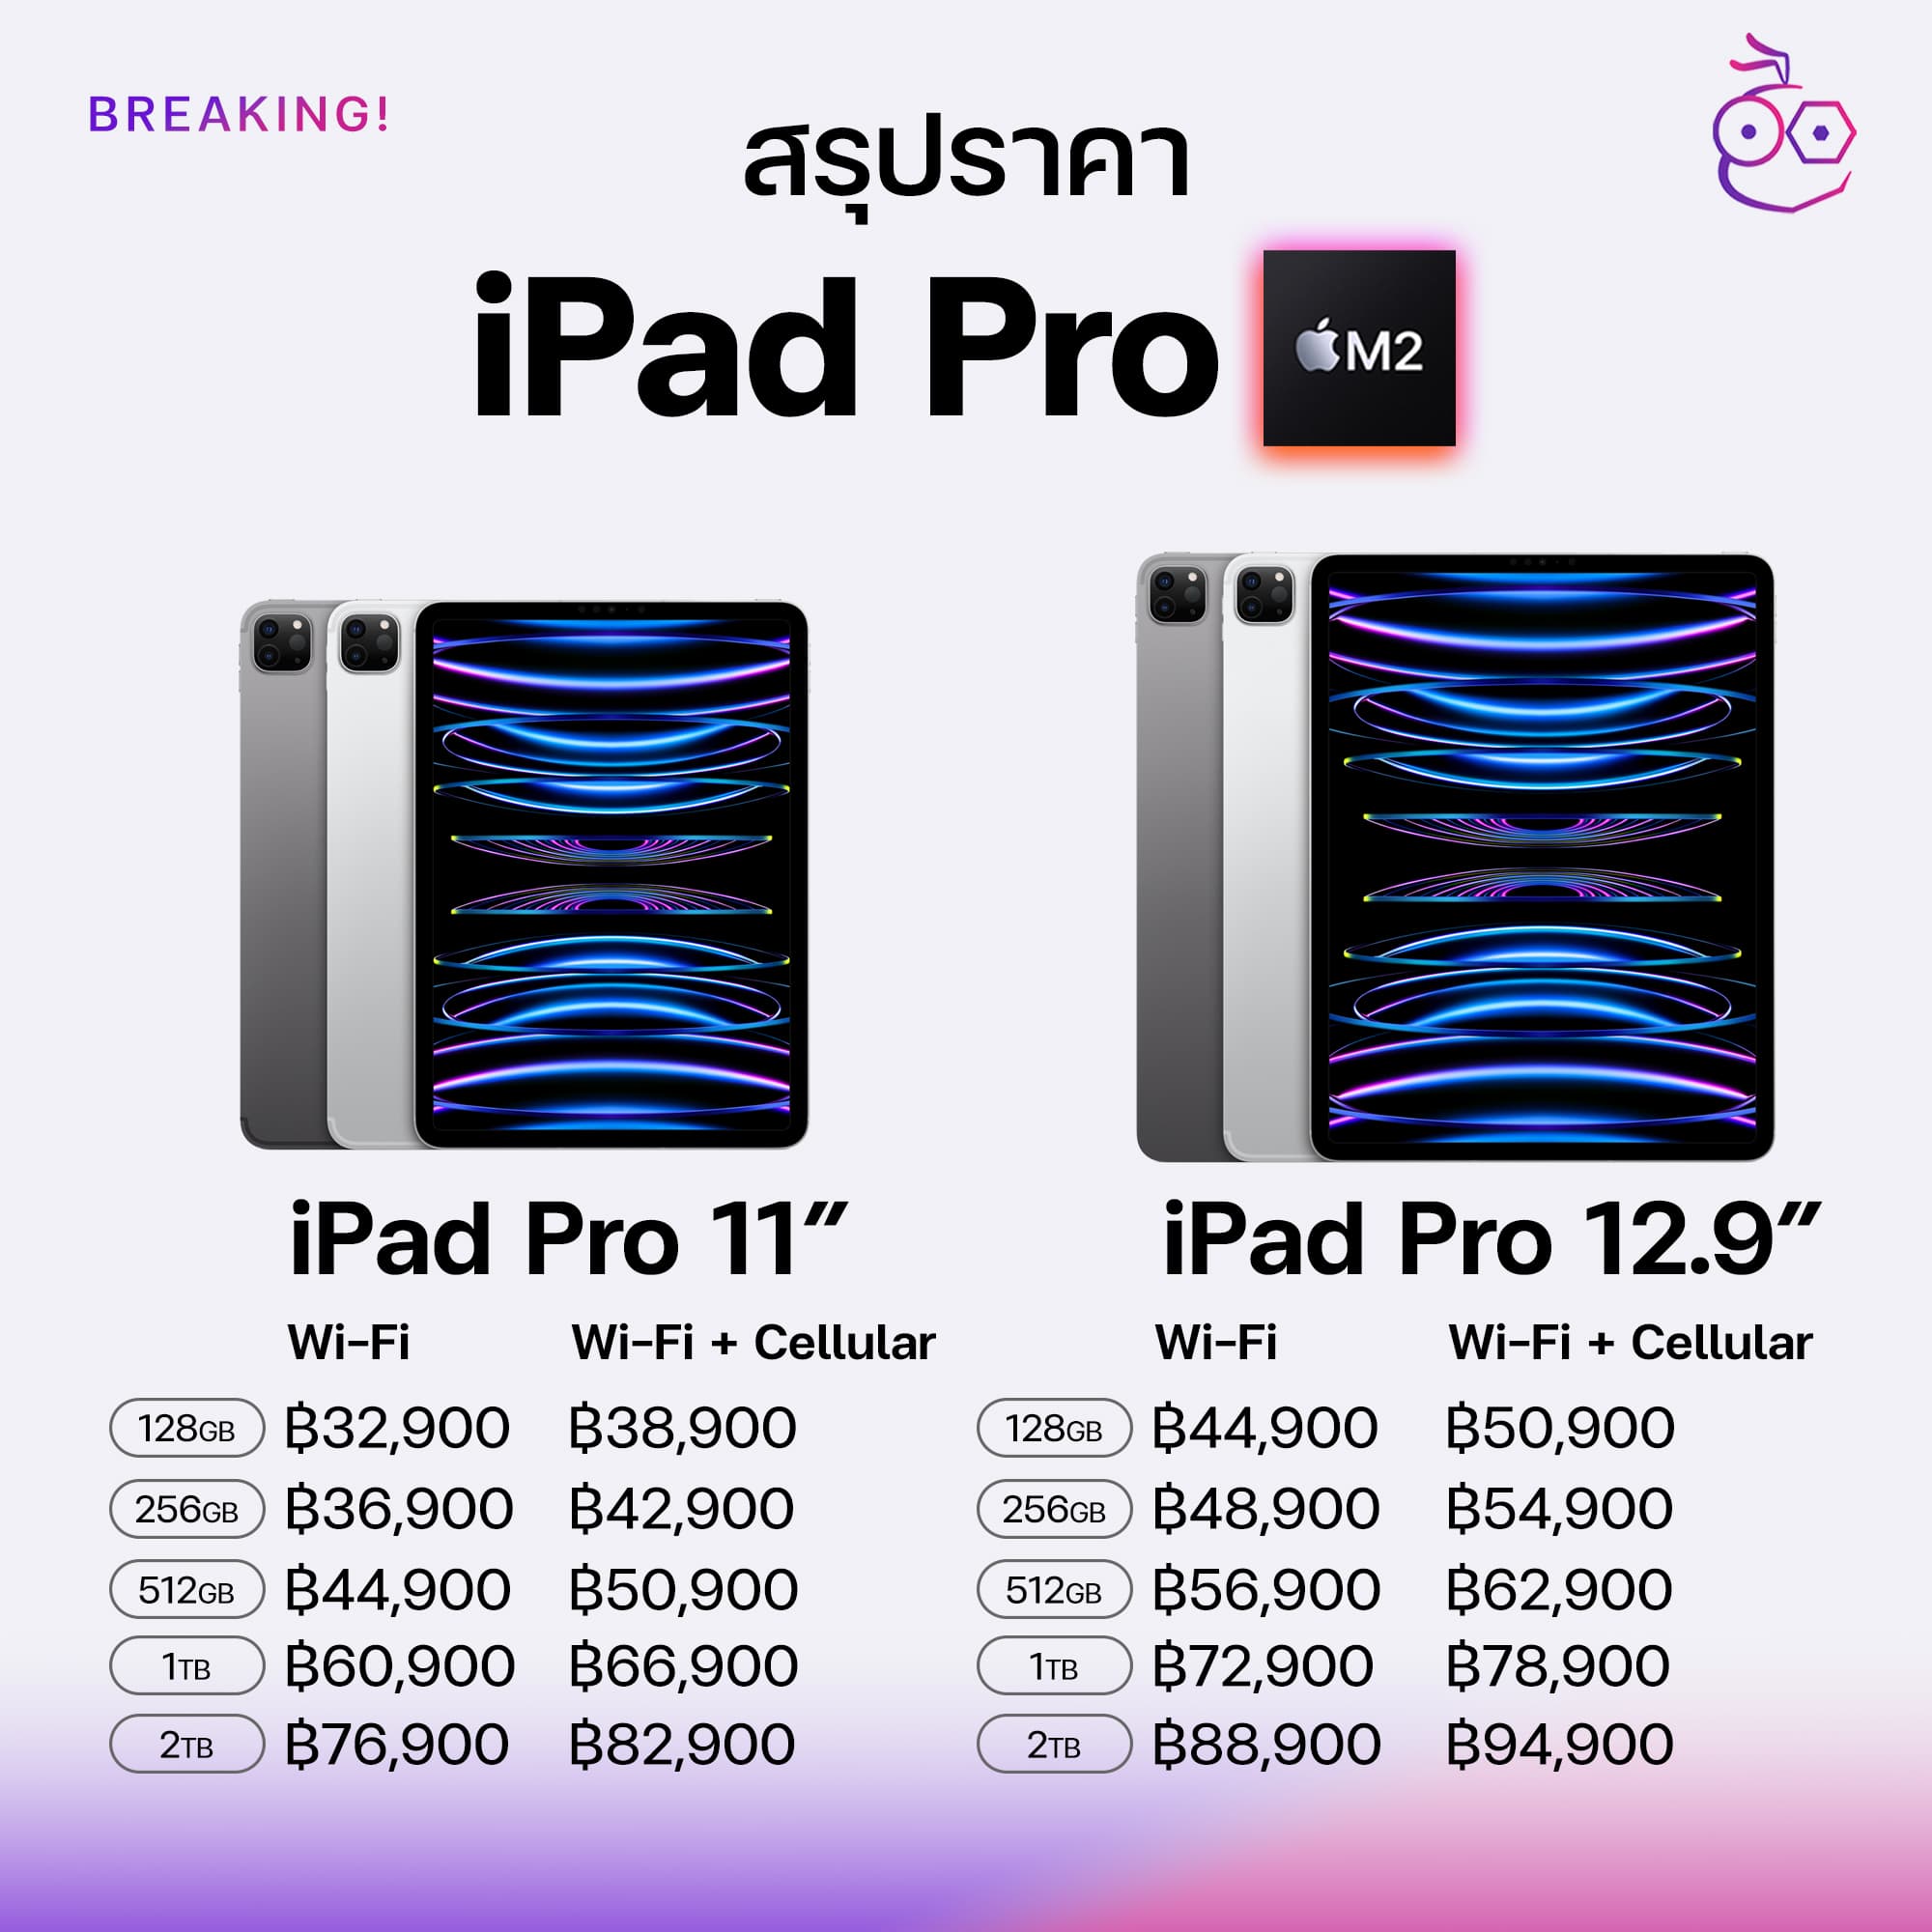 iPad Pro (2022) launched with original M2 chip, ProRes video recording